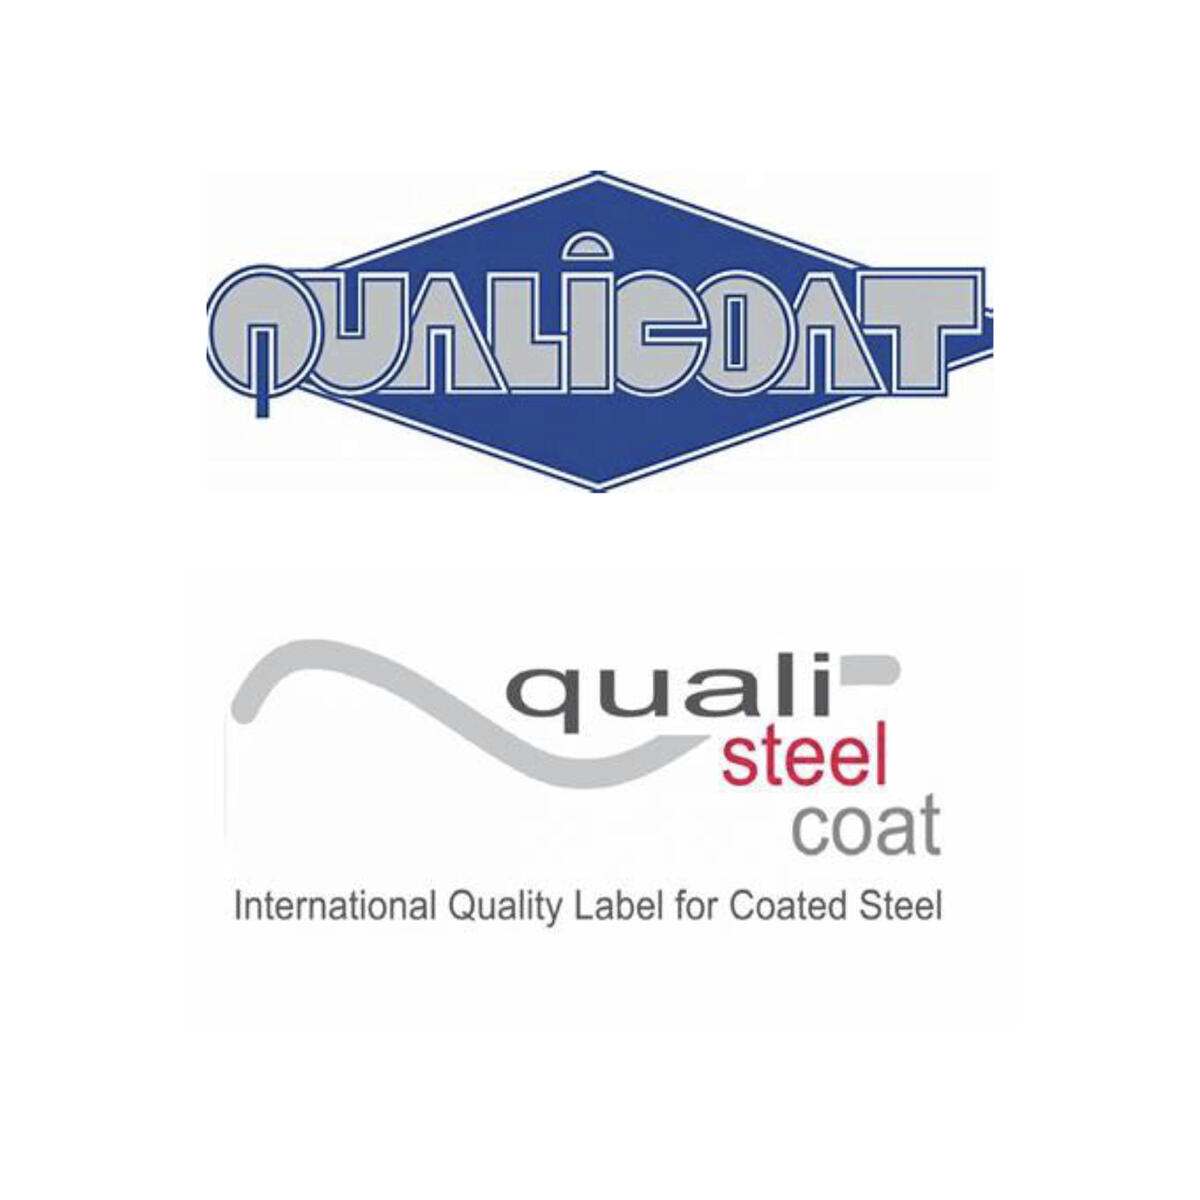 QUALICOAT and QUALISTEELCOAT: WHAT CERTIFICATIONS ARE WE TALKING ABOUT?